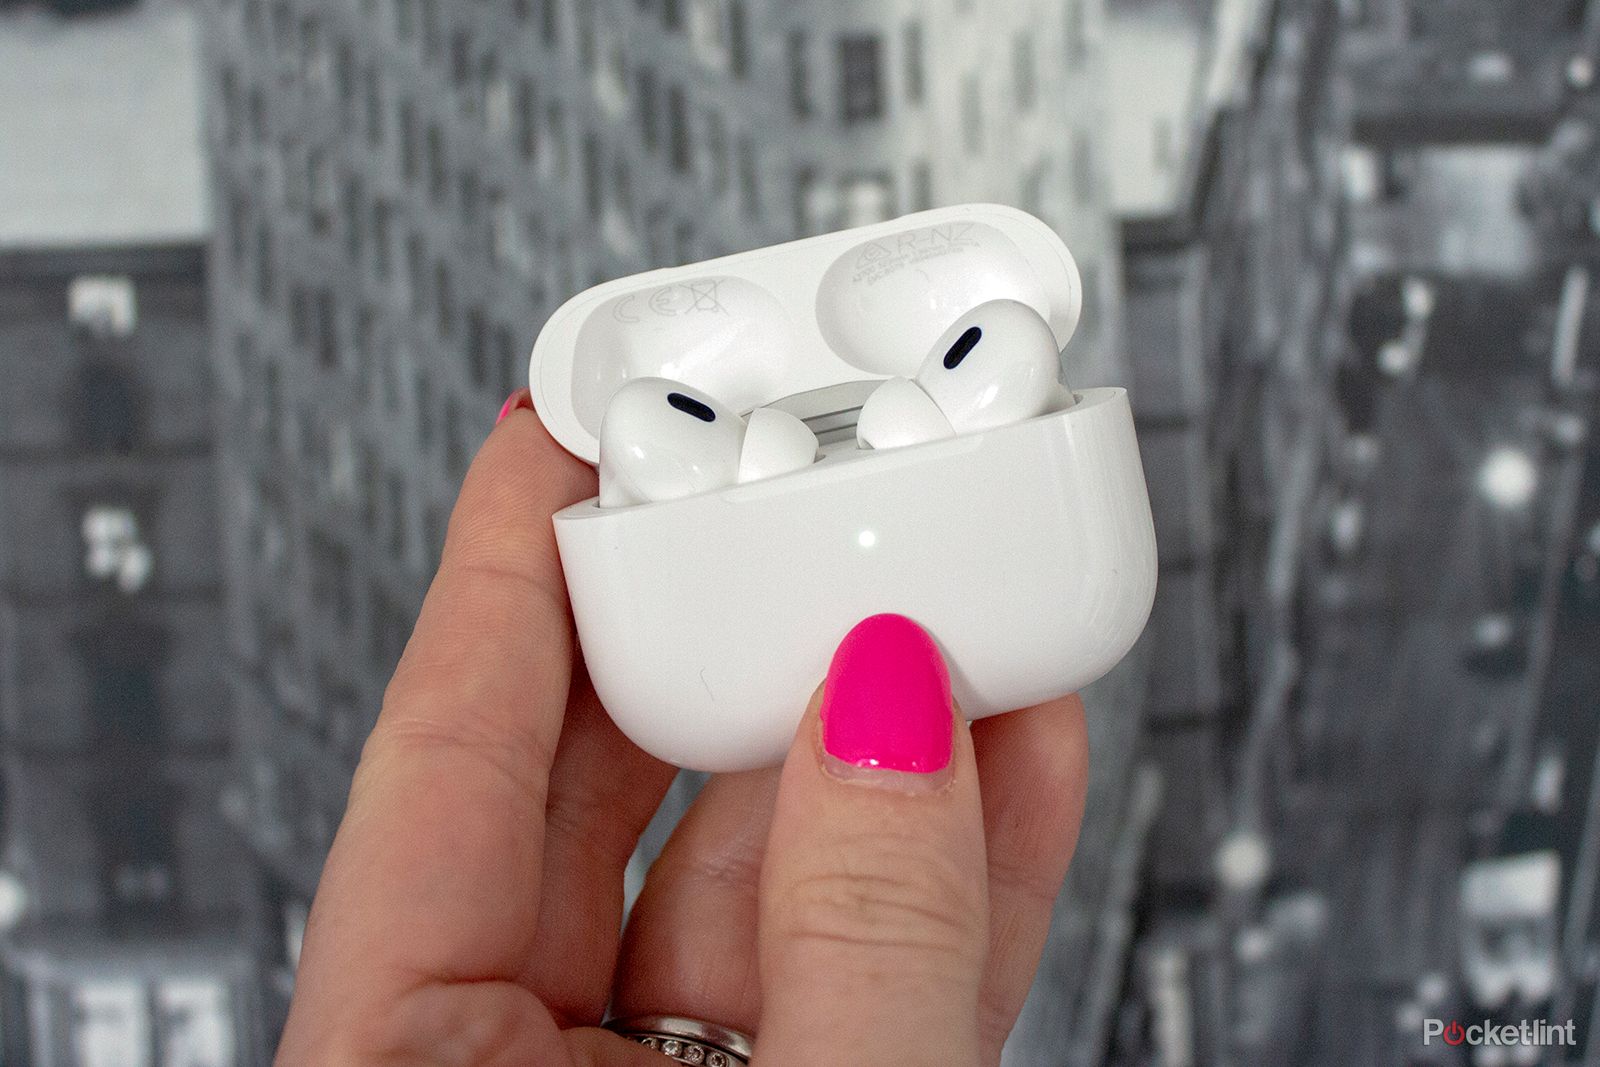 Apple AirPods Pro 2 in their case